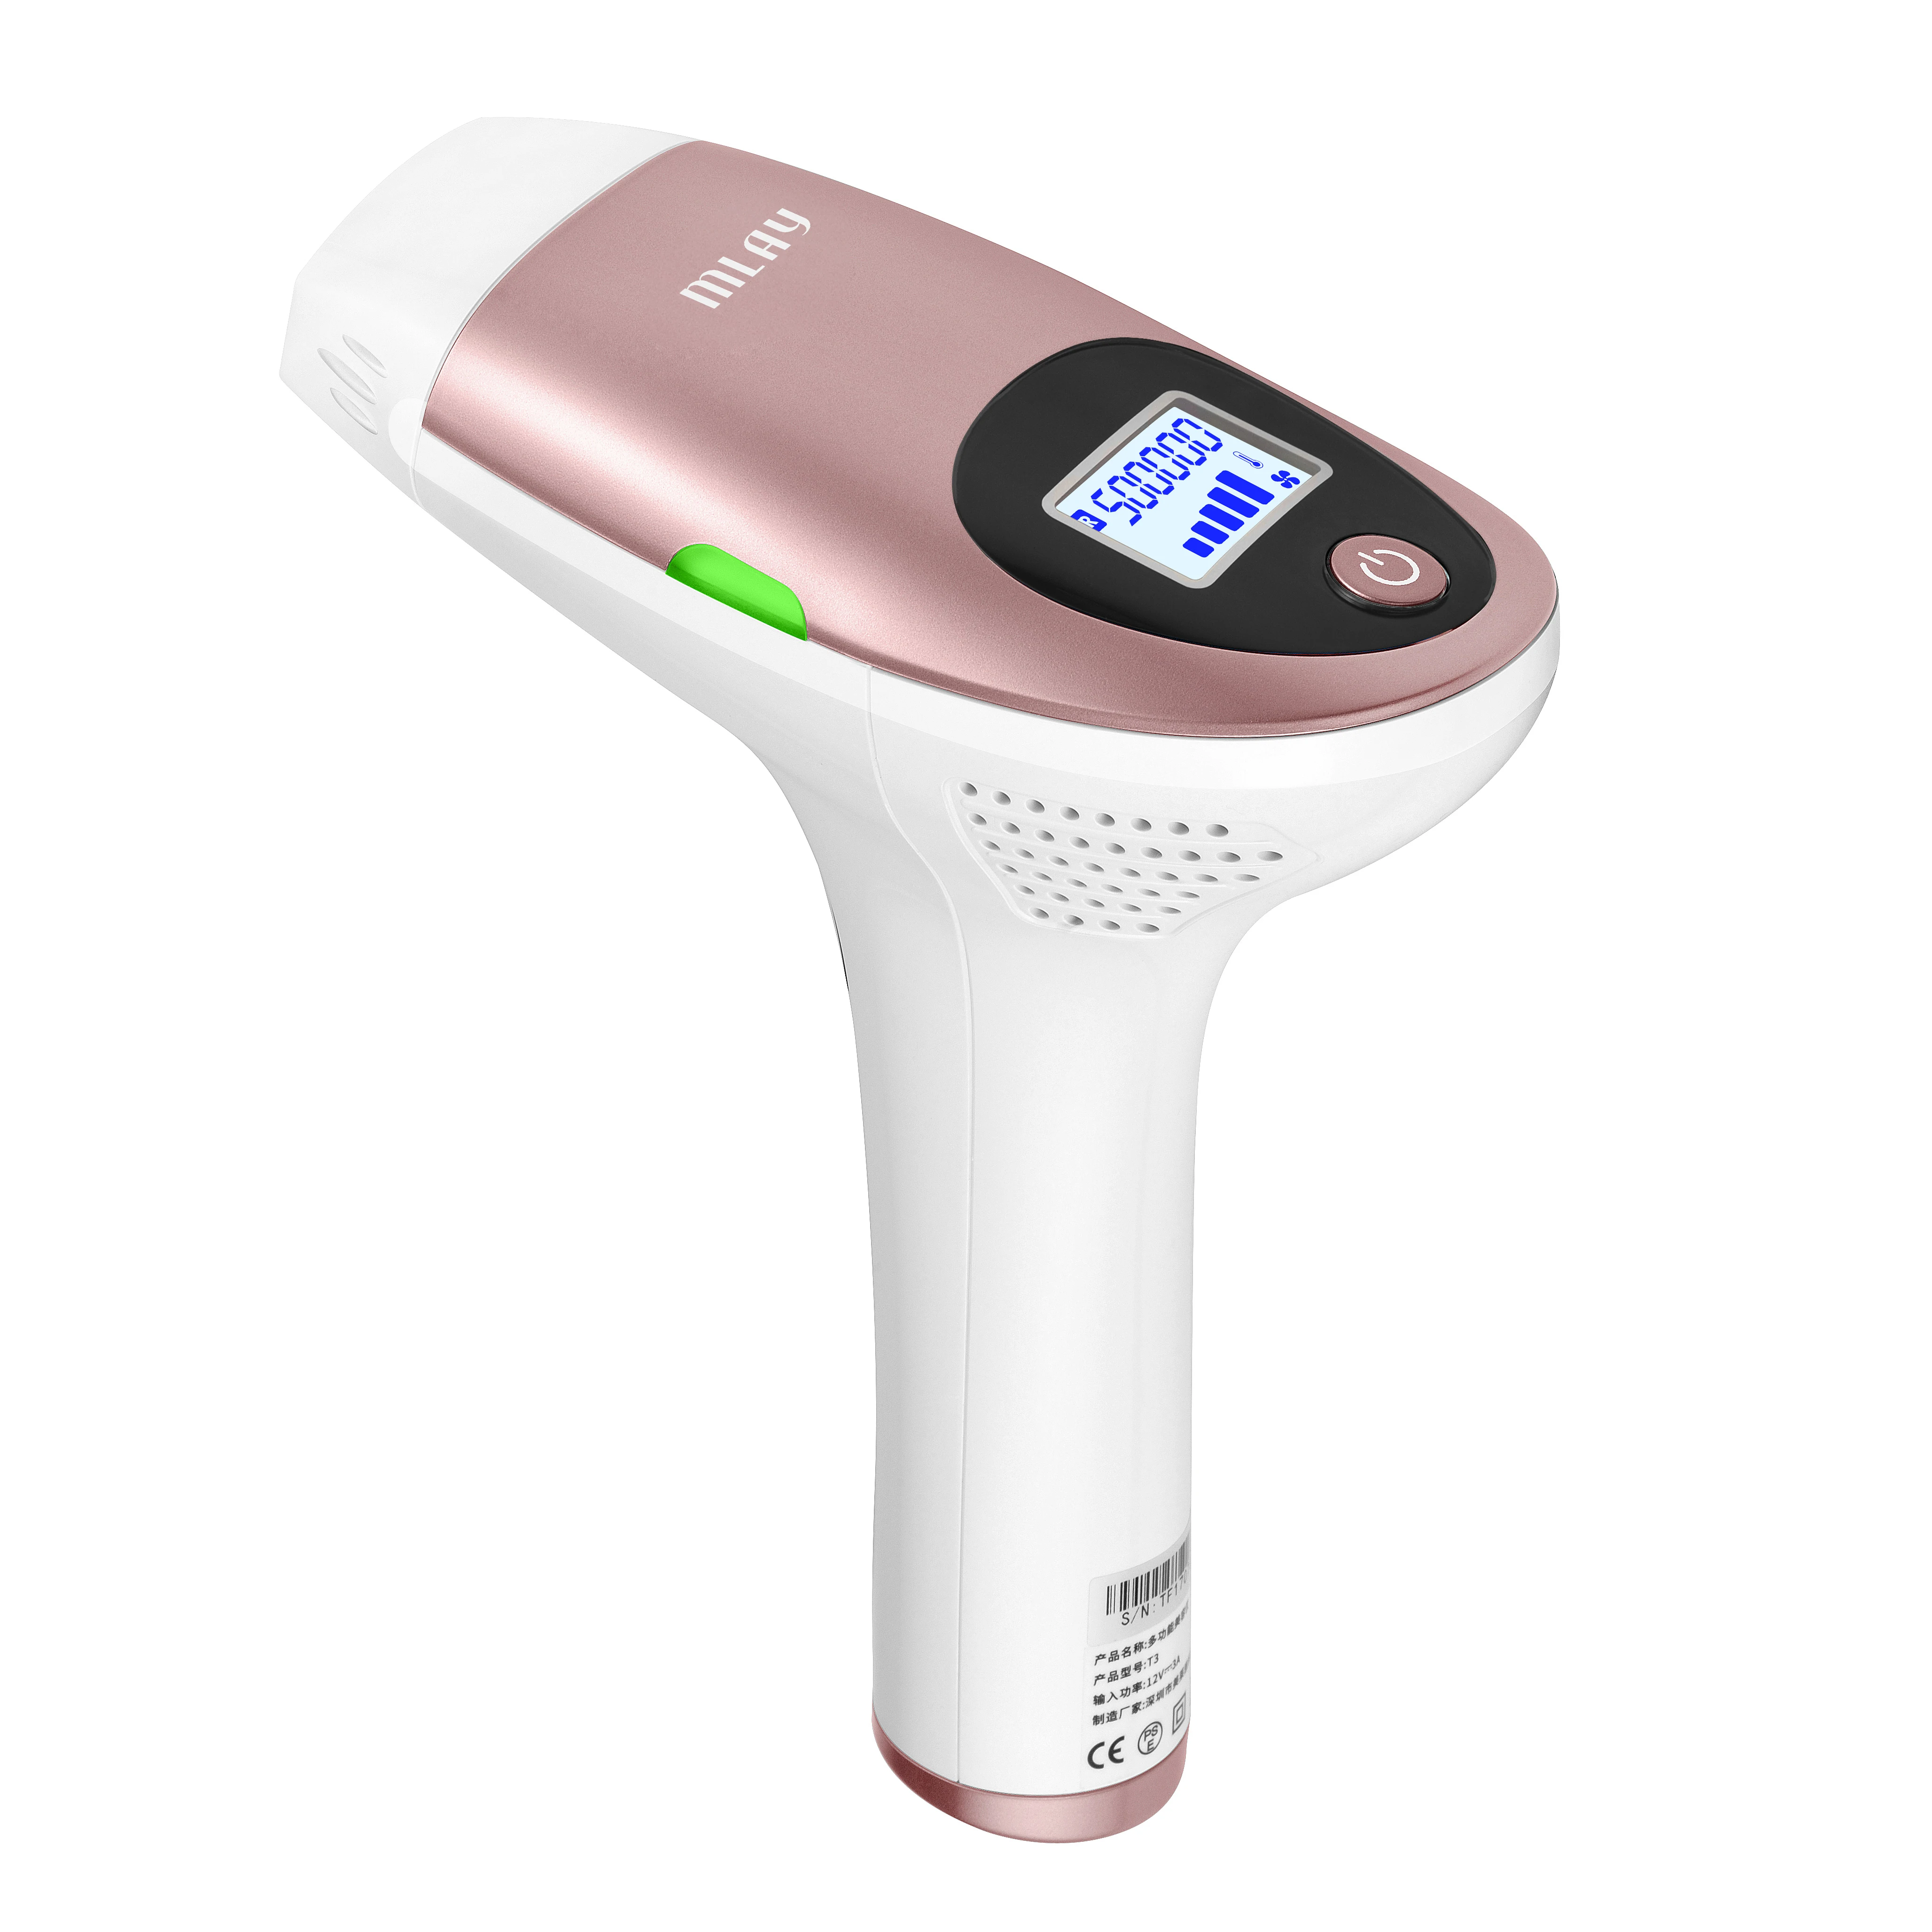 2020 IPL Permanent Laser Hair Removal MLAY Factory IPL Hair Removal Device For Ladies With 500000 Flashes depilator for women enlarge